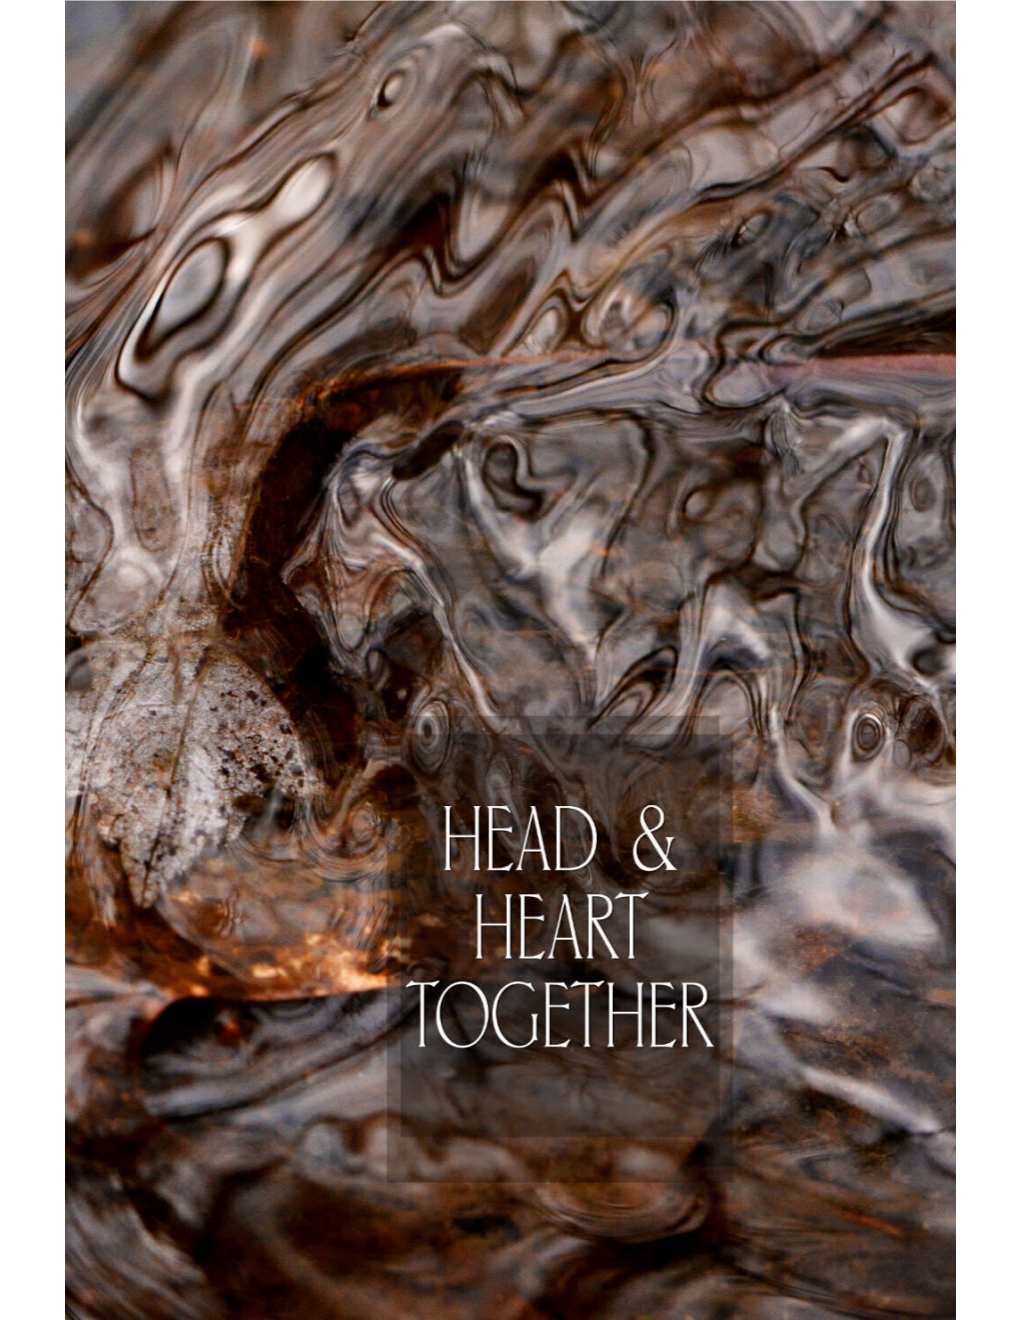 Head & Heart Together: Essays on the Buddhist Path